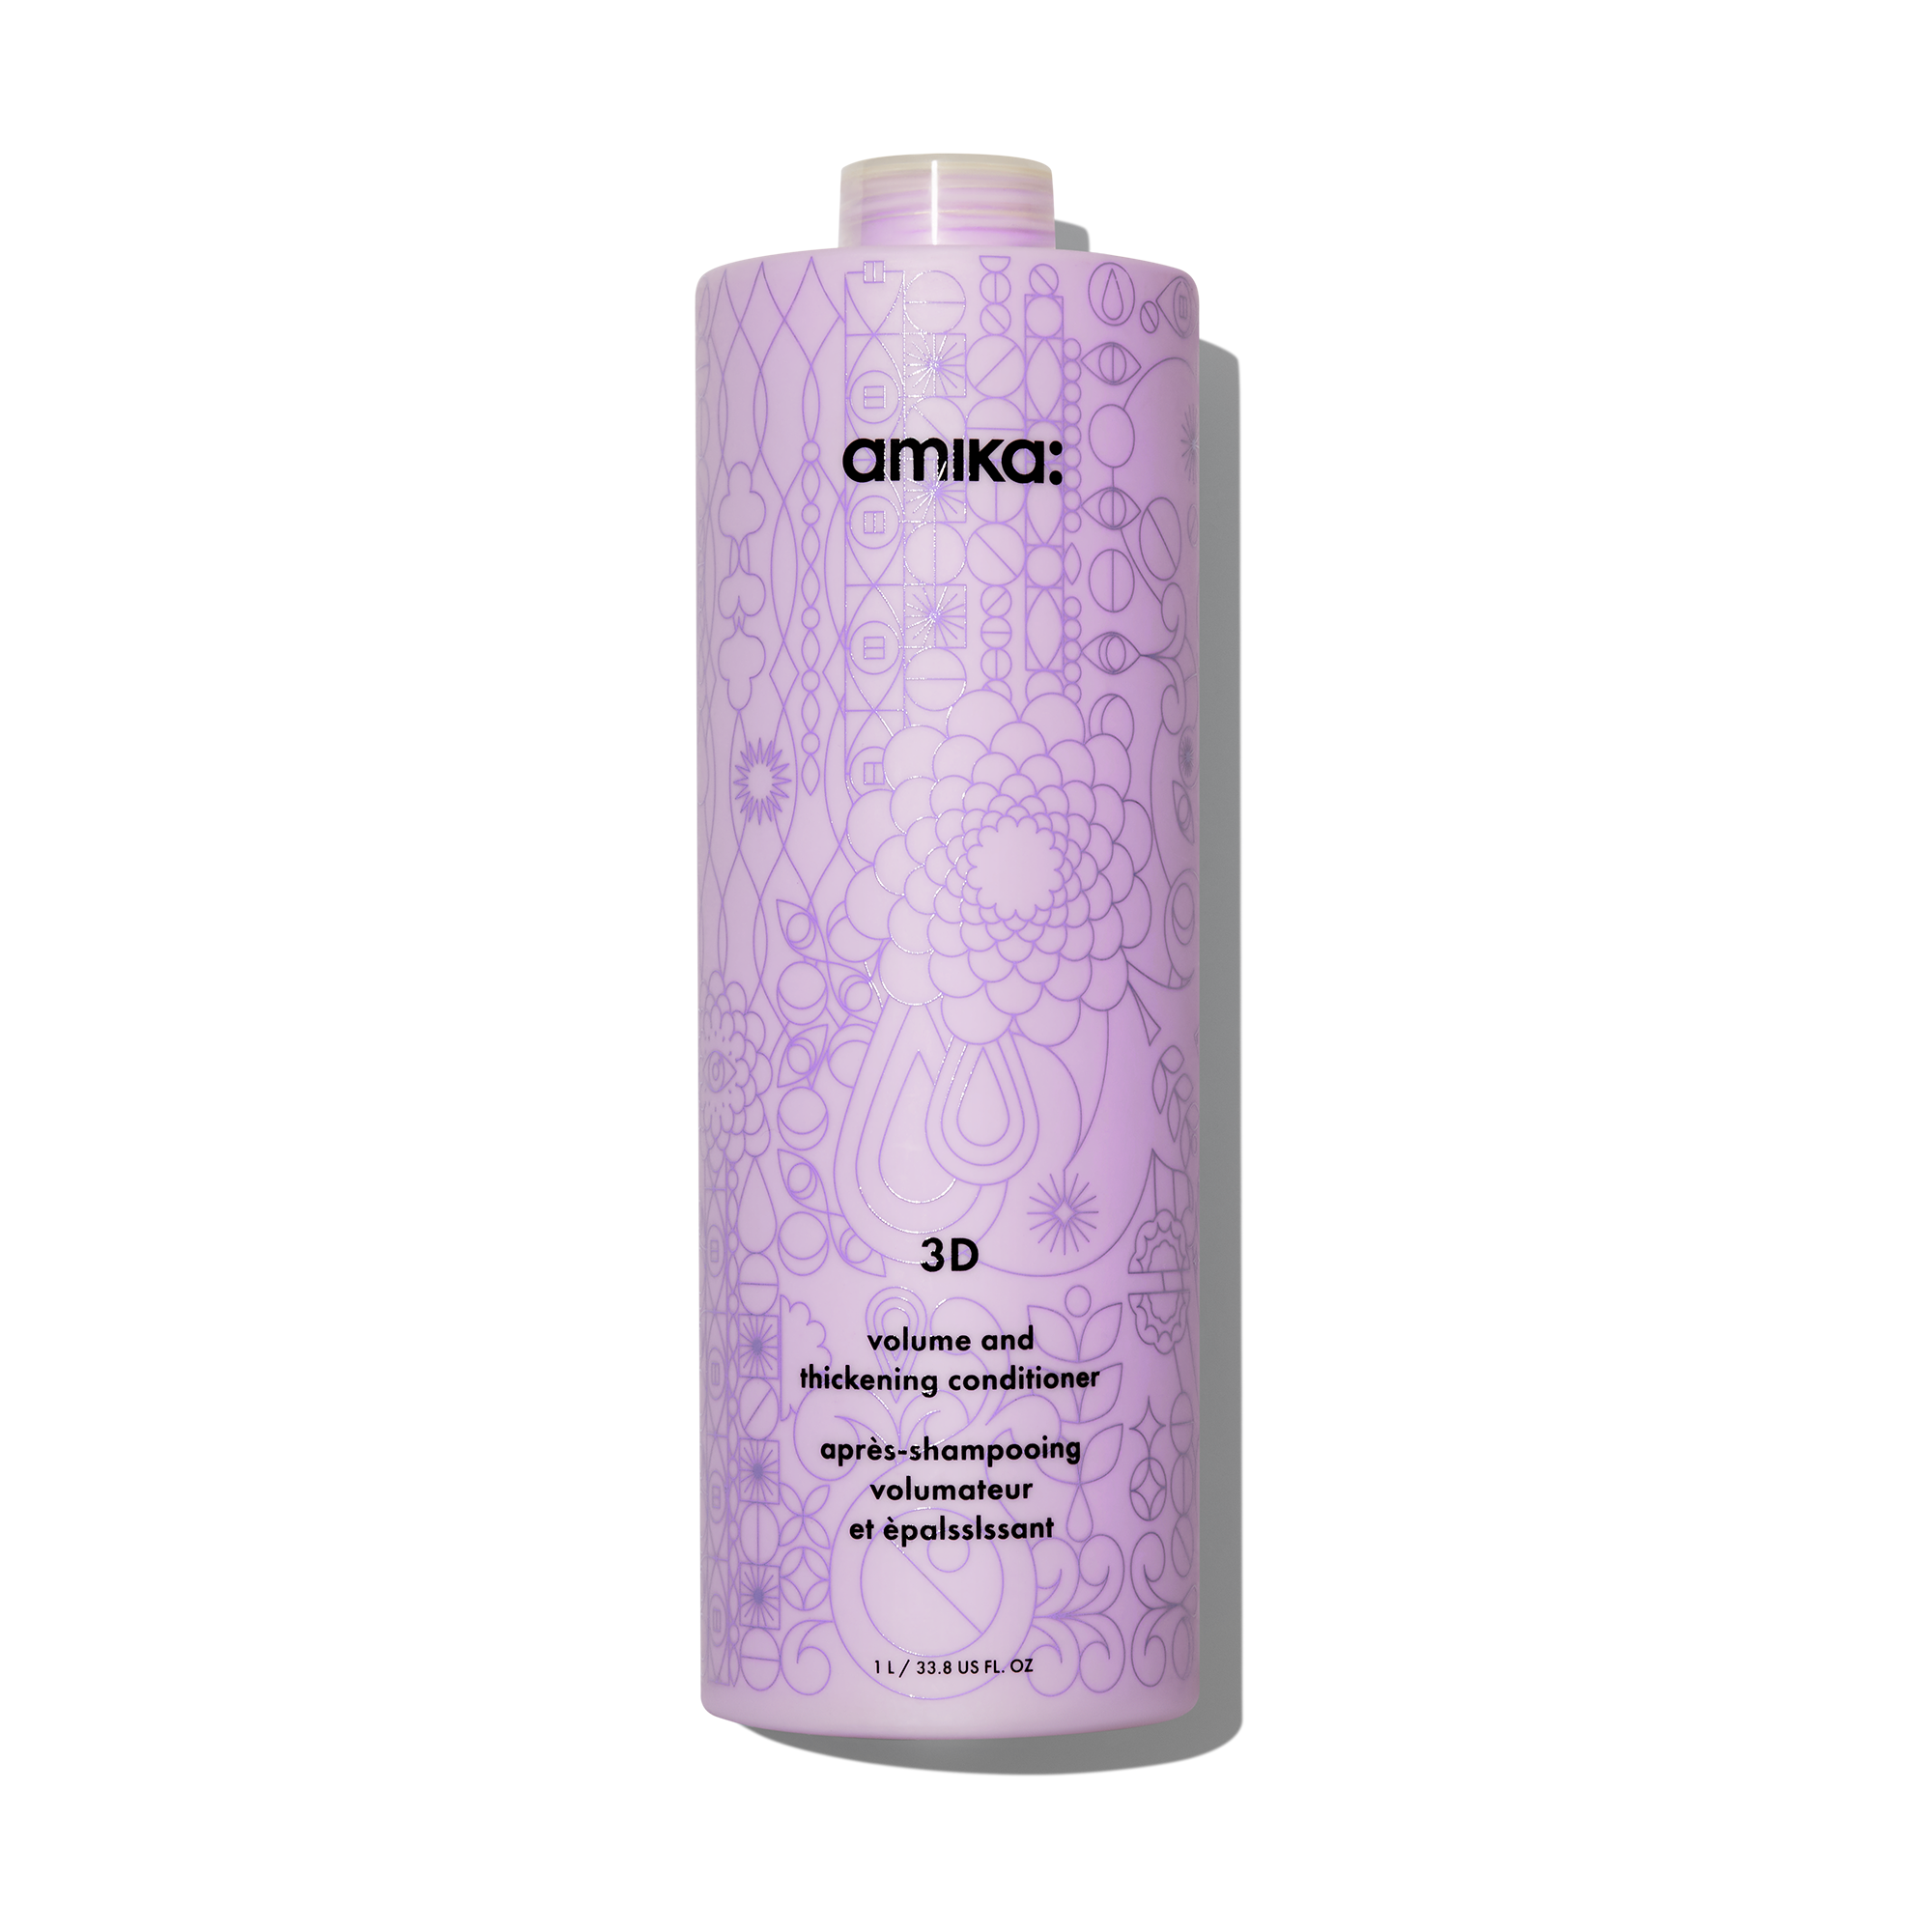 Amika 3D Volume and Thickening Shampoo and Conditioner Liter Duo ($136 Value) / 32OZ